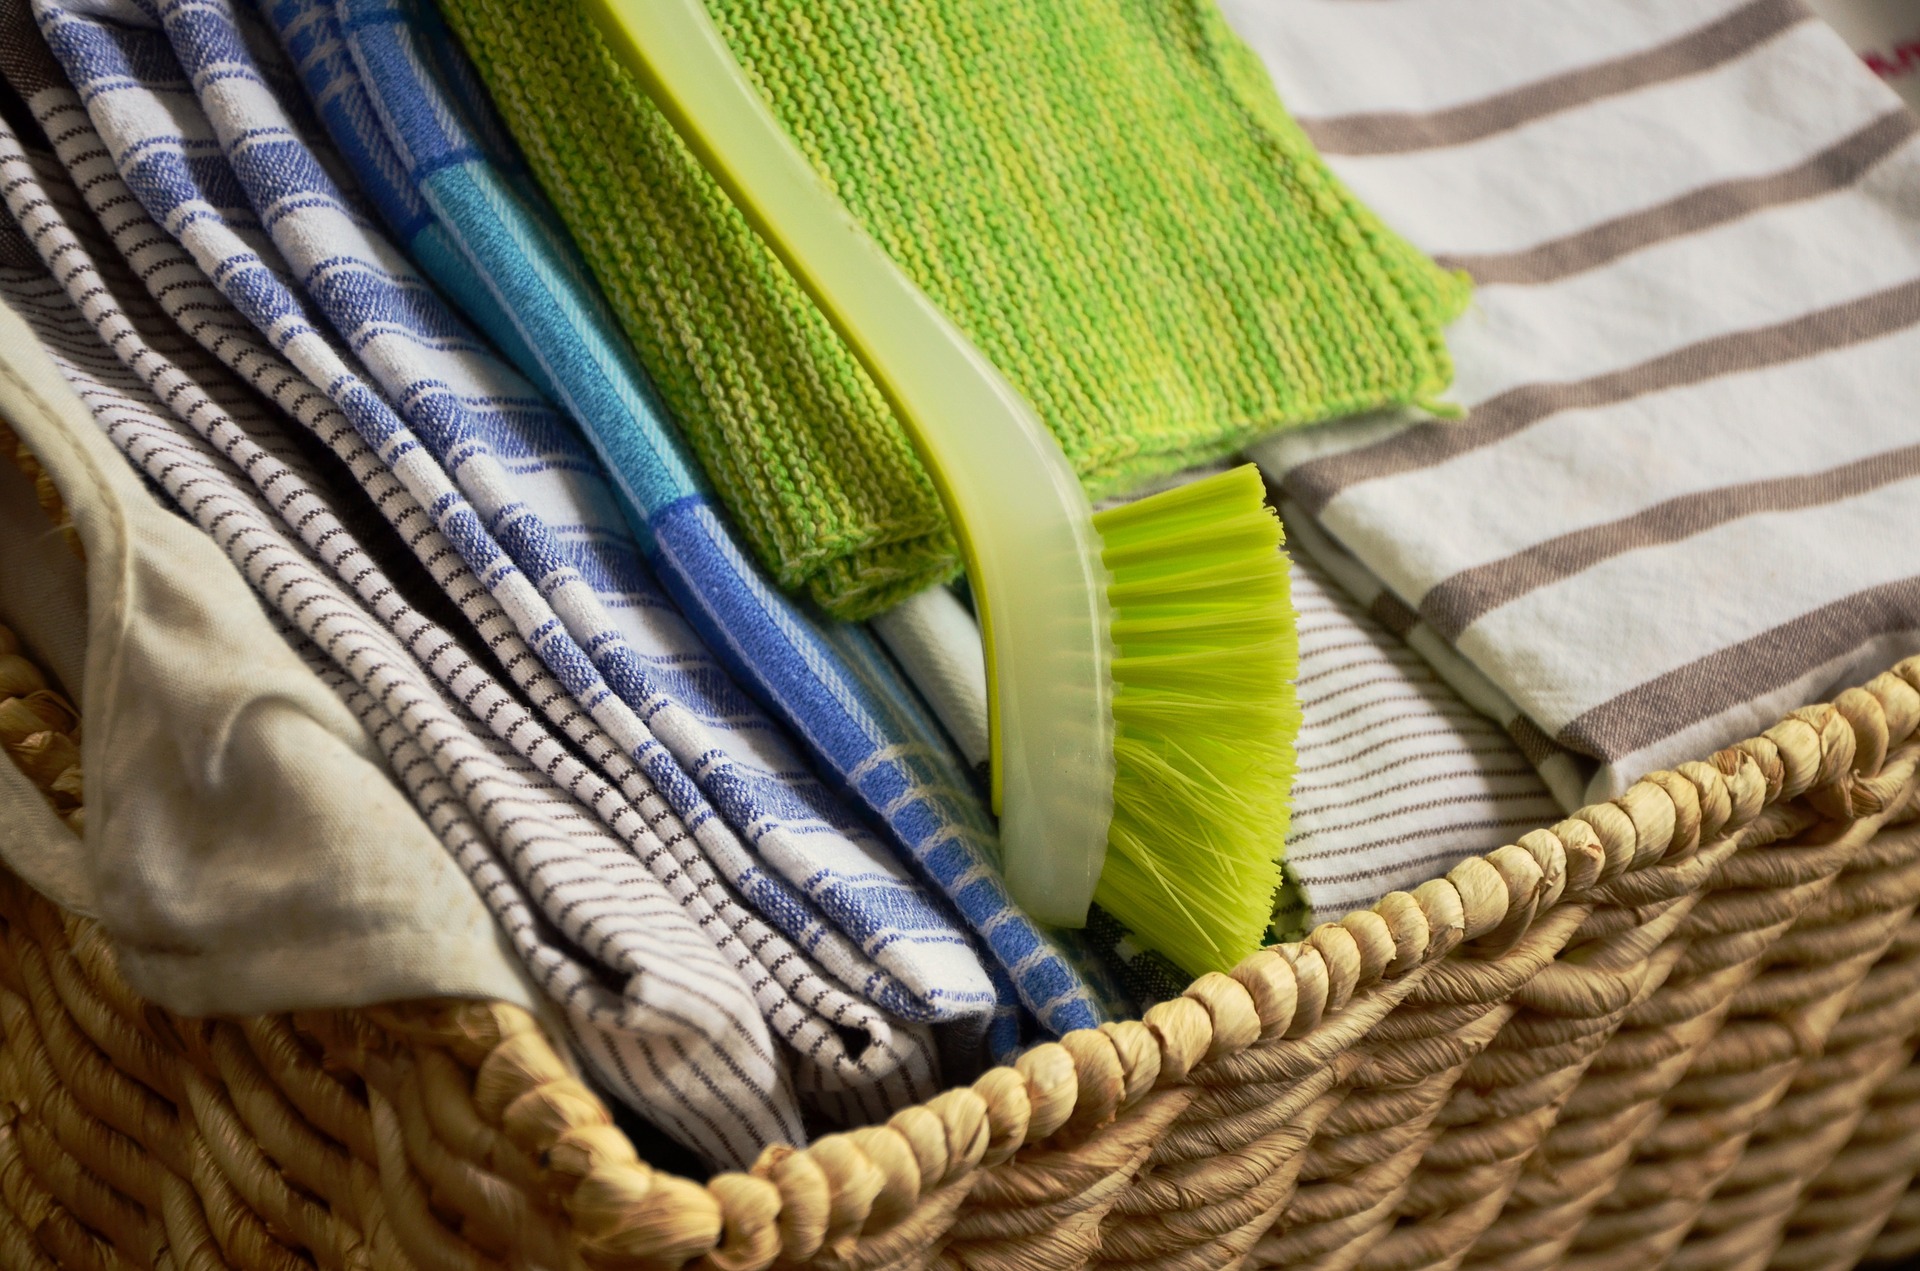 7 Tips for Organizing Your Tea Towels and Other Kitchen Materials